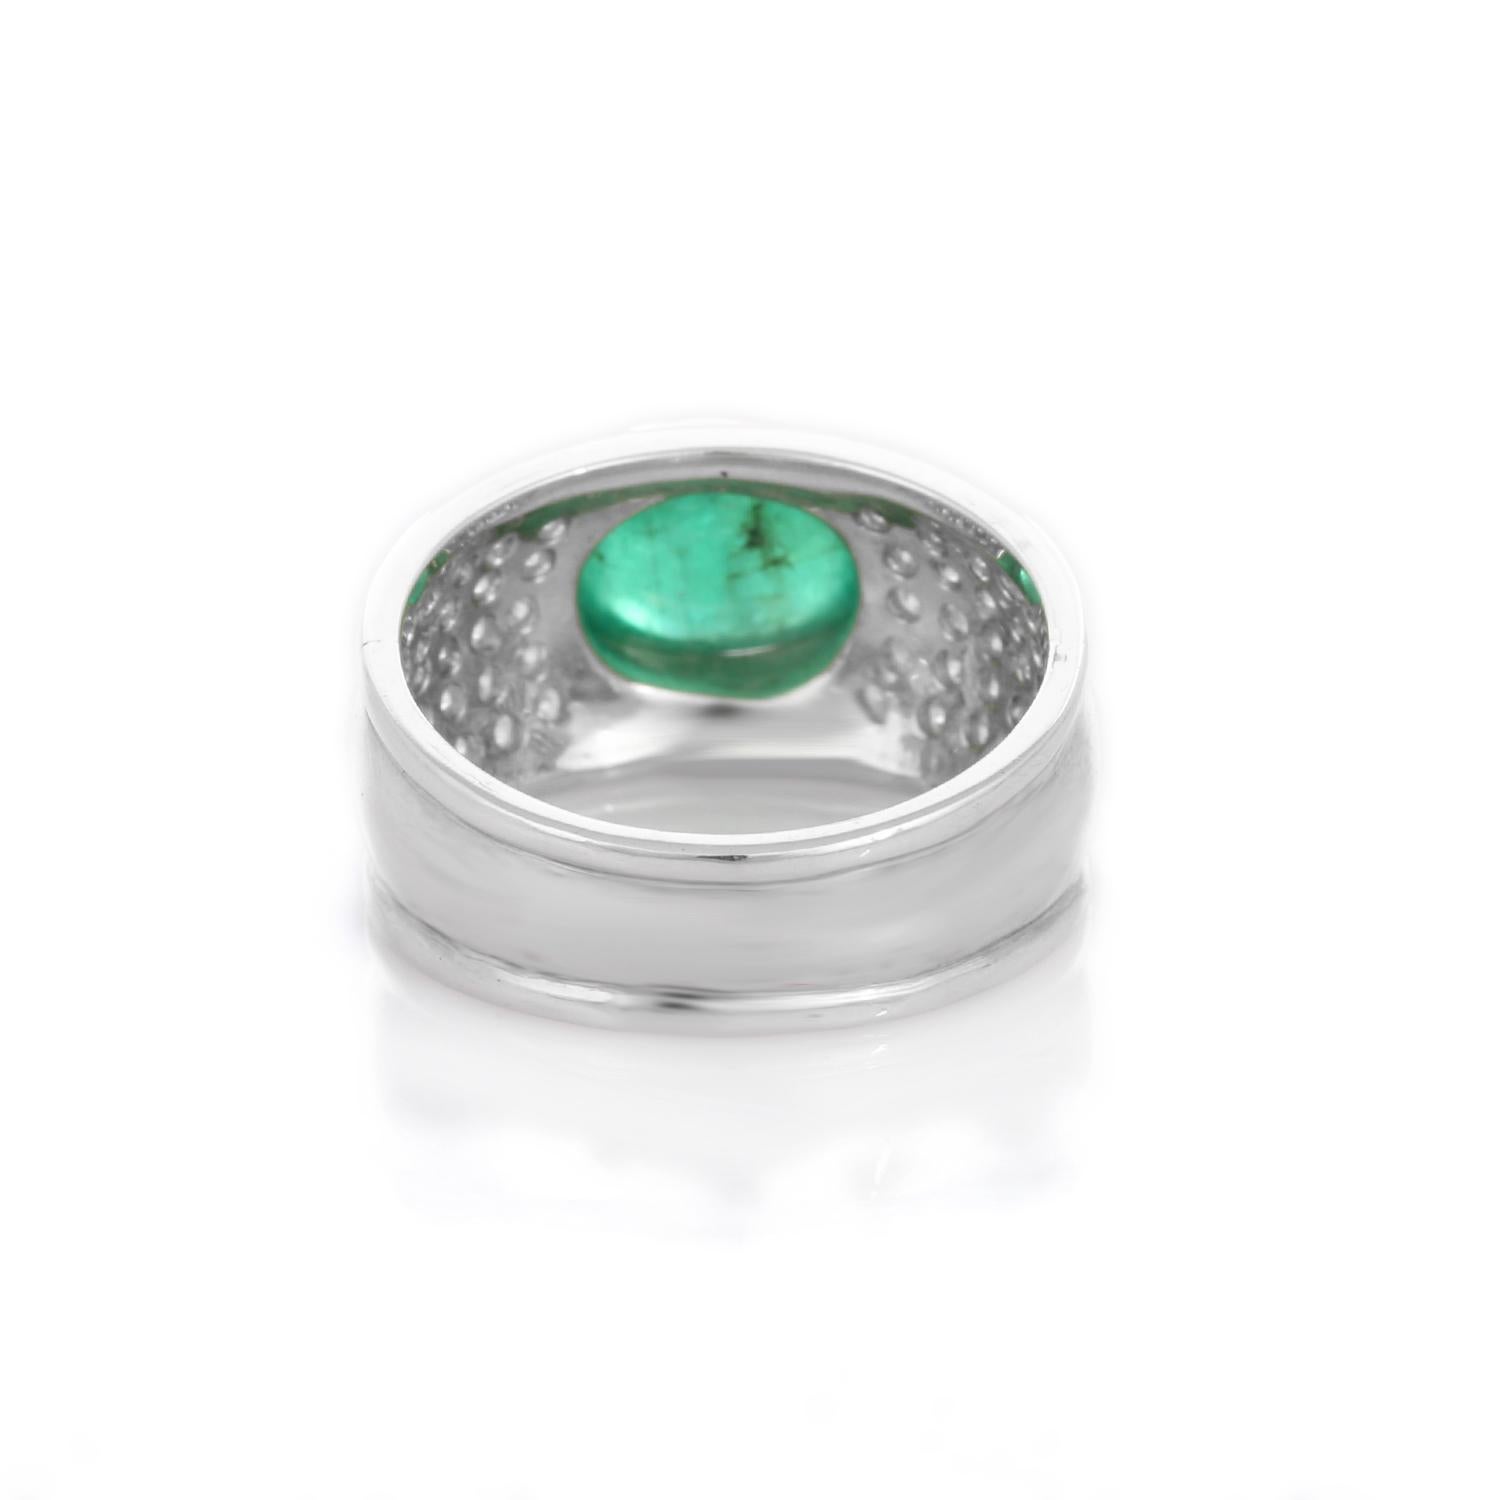 For Sale:  3.08 Carat Oval Shaped Emerald and Diamond Cocktail Ring in 18K White Gold 5